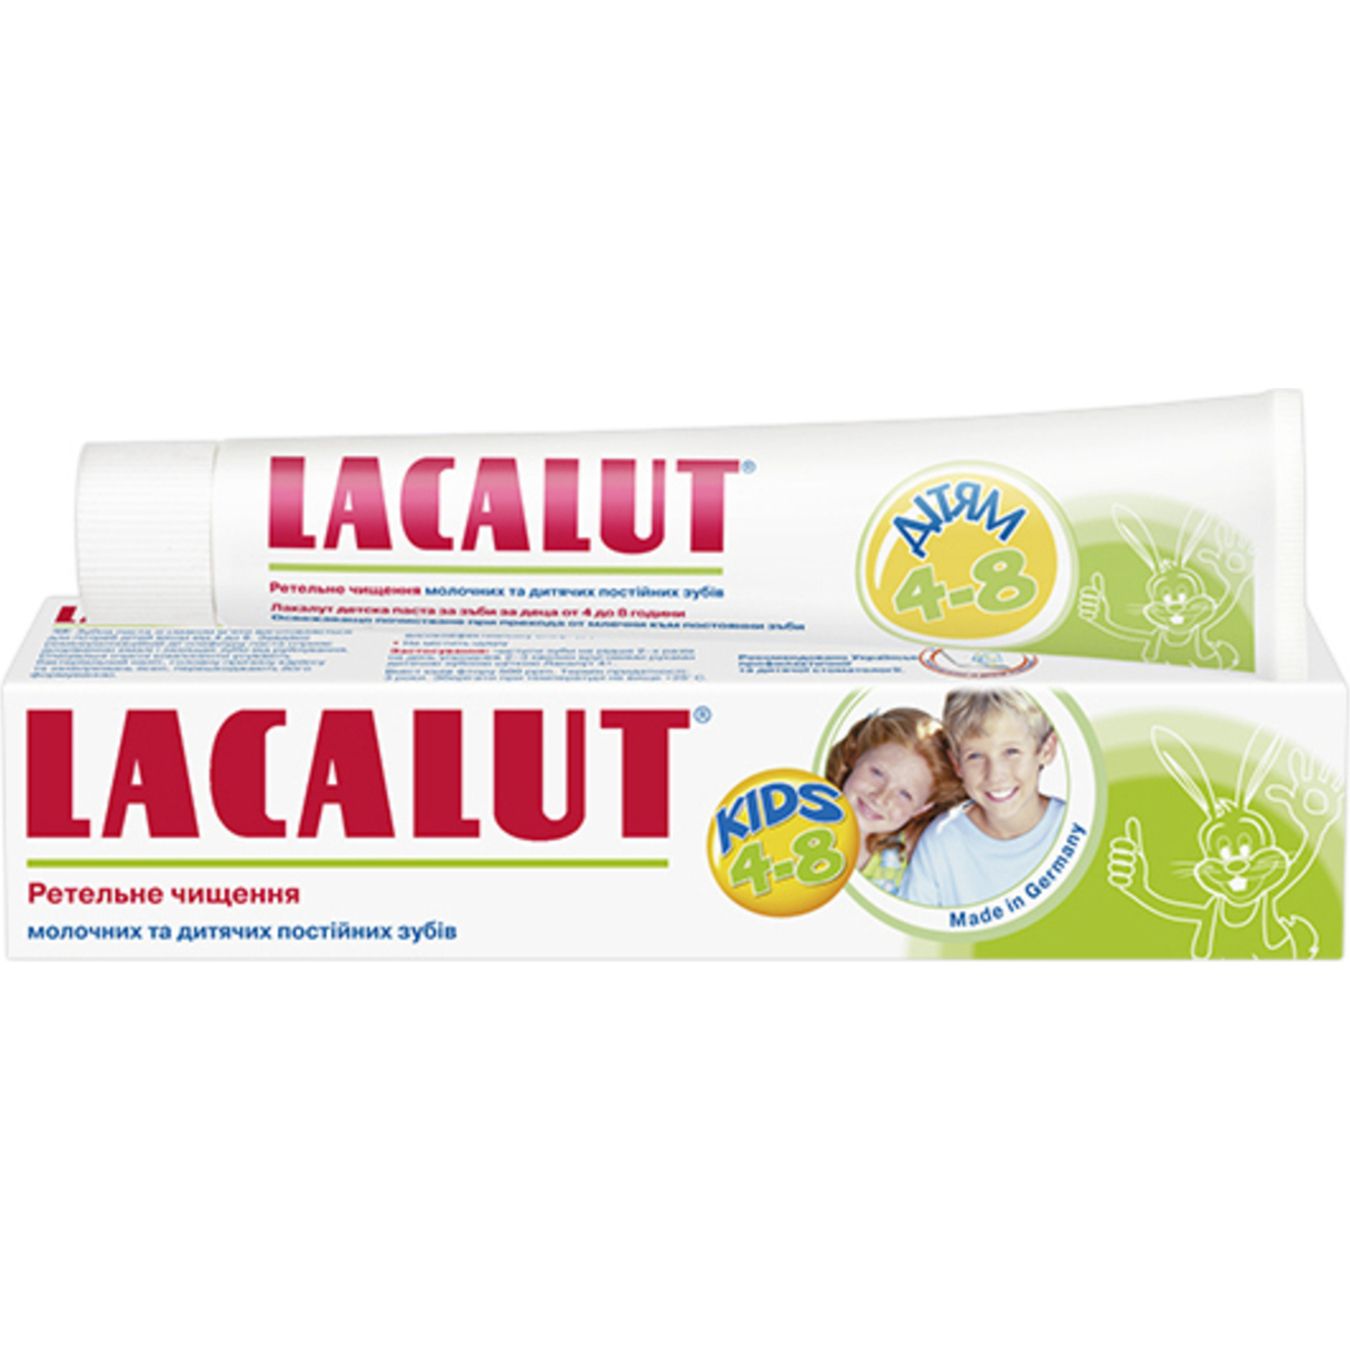 Lacalut Toothpaste for children from 4 to 8 years 50ml